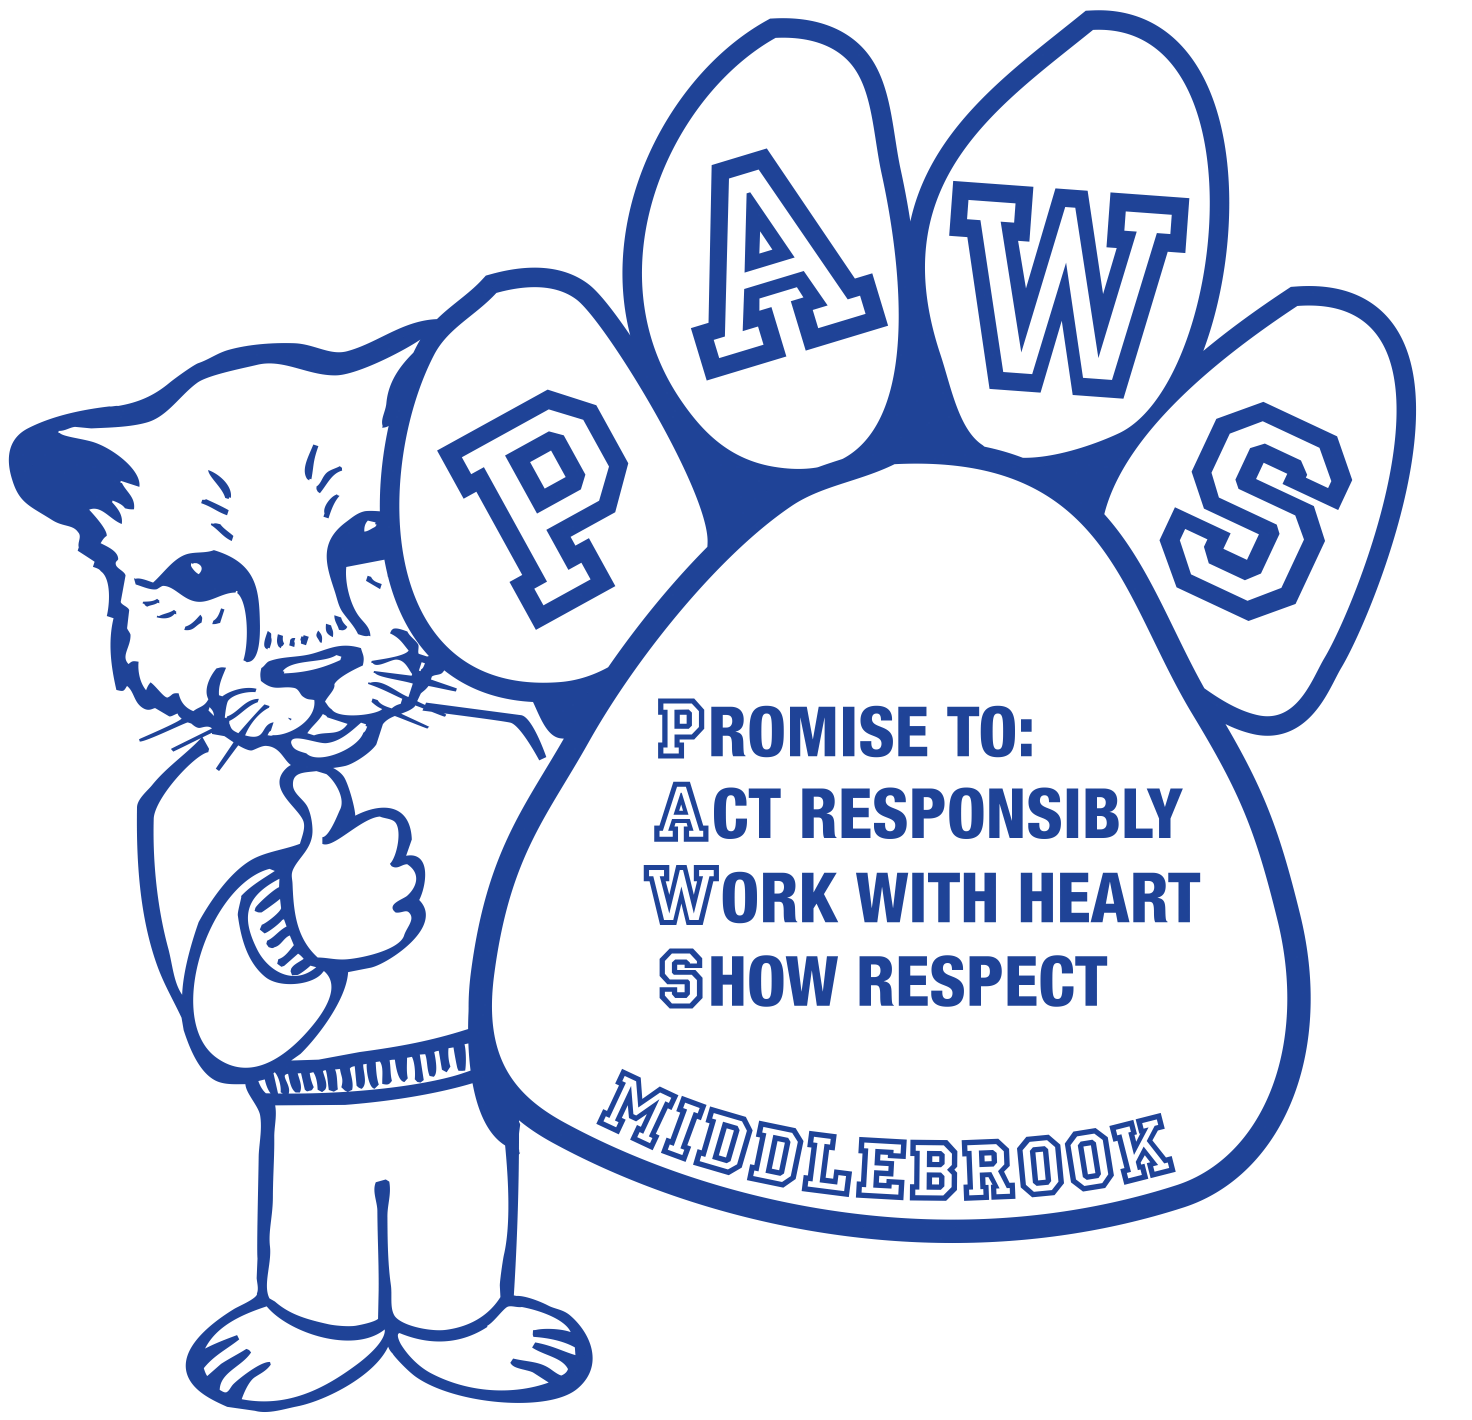 Mascot with PAWS acronym